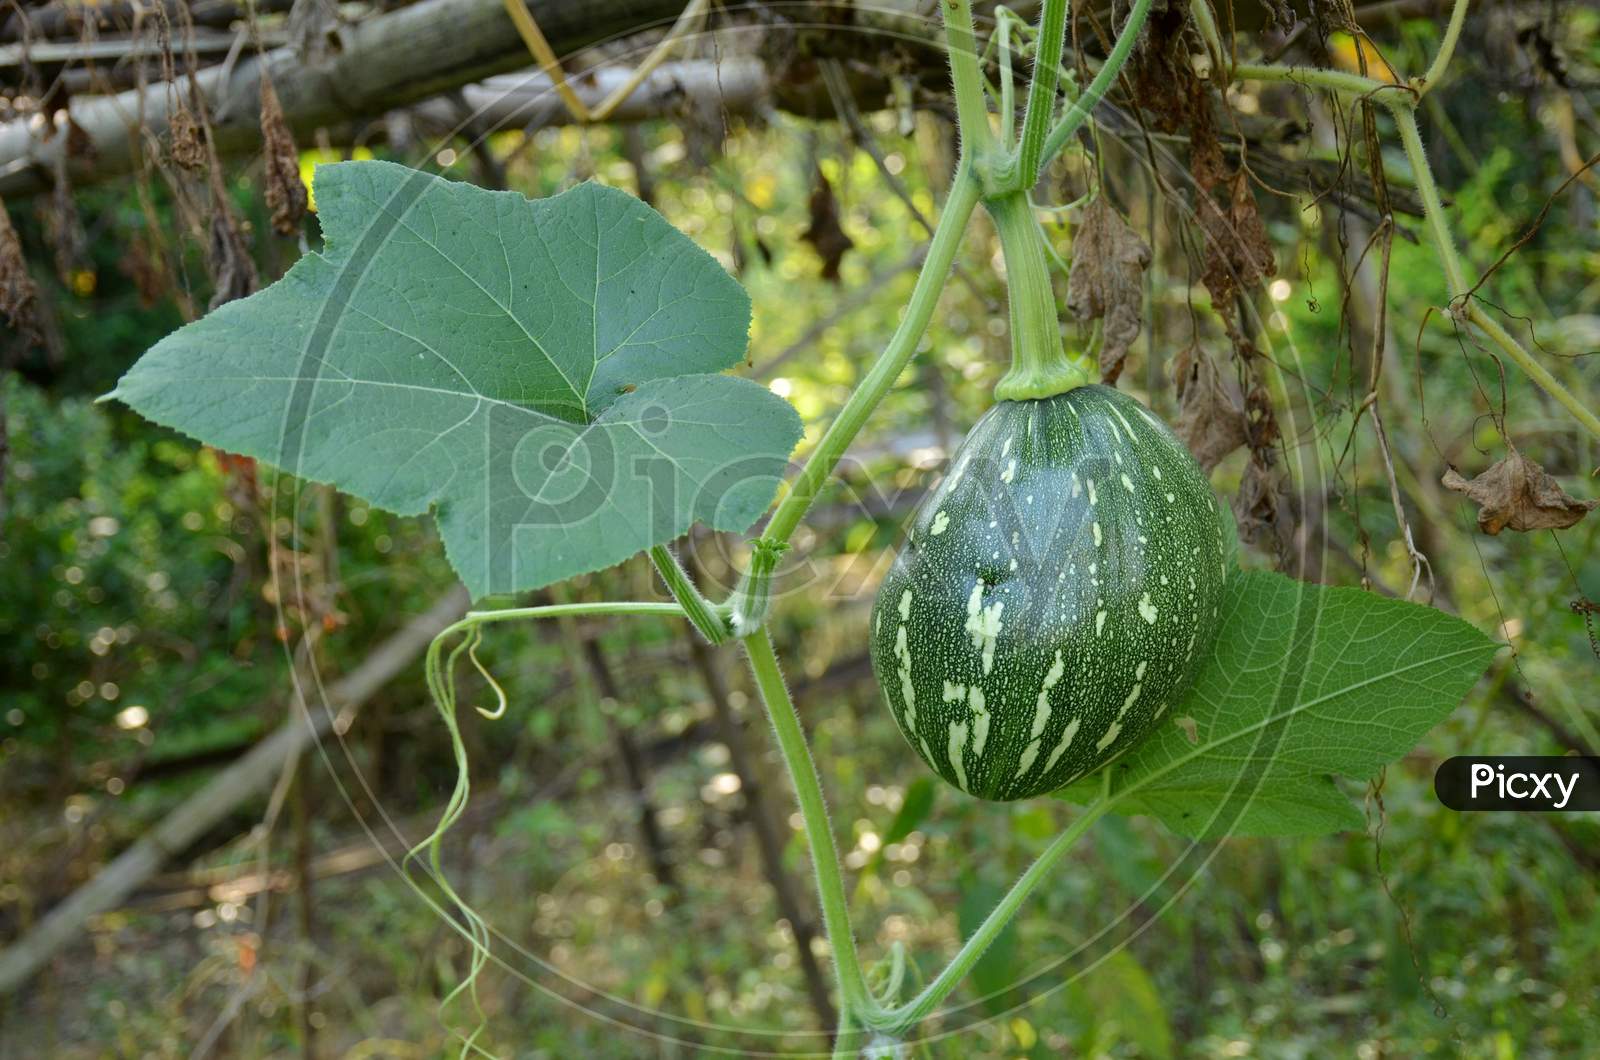 The Green Ripe Pumpkin With Vine And Leaves In The Garden.